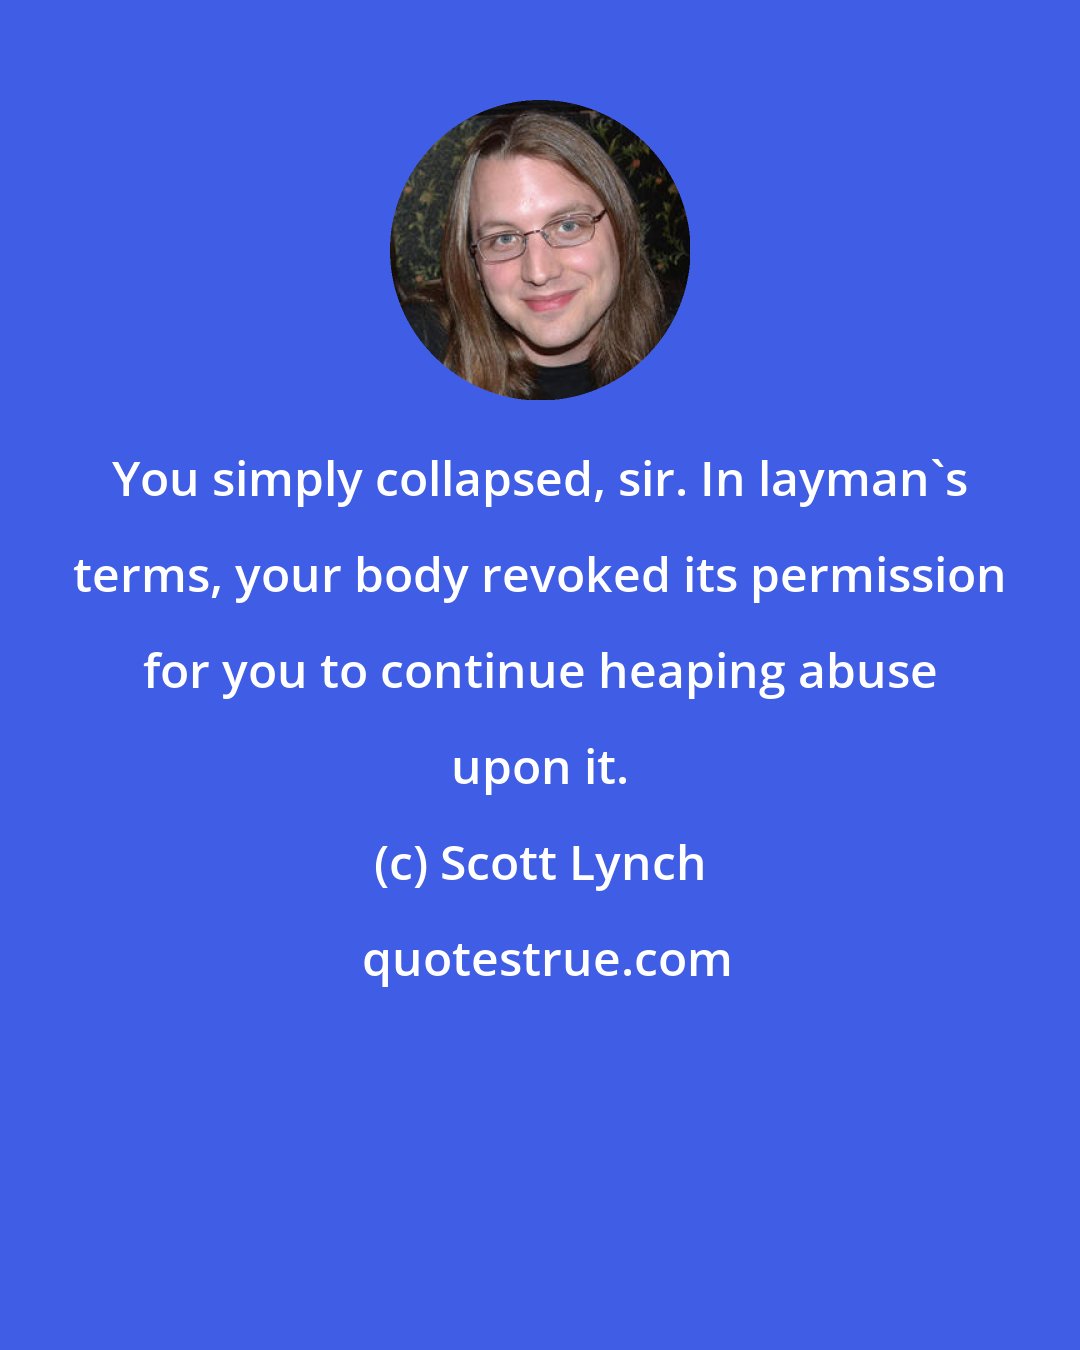 Scott Lynch: You simply collapsed, sir. In layman's terms, your body revoked its permission for you to continue heaping abuse upon it.